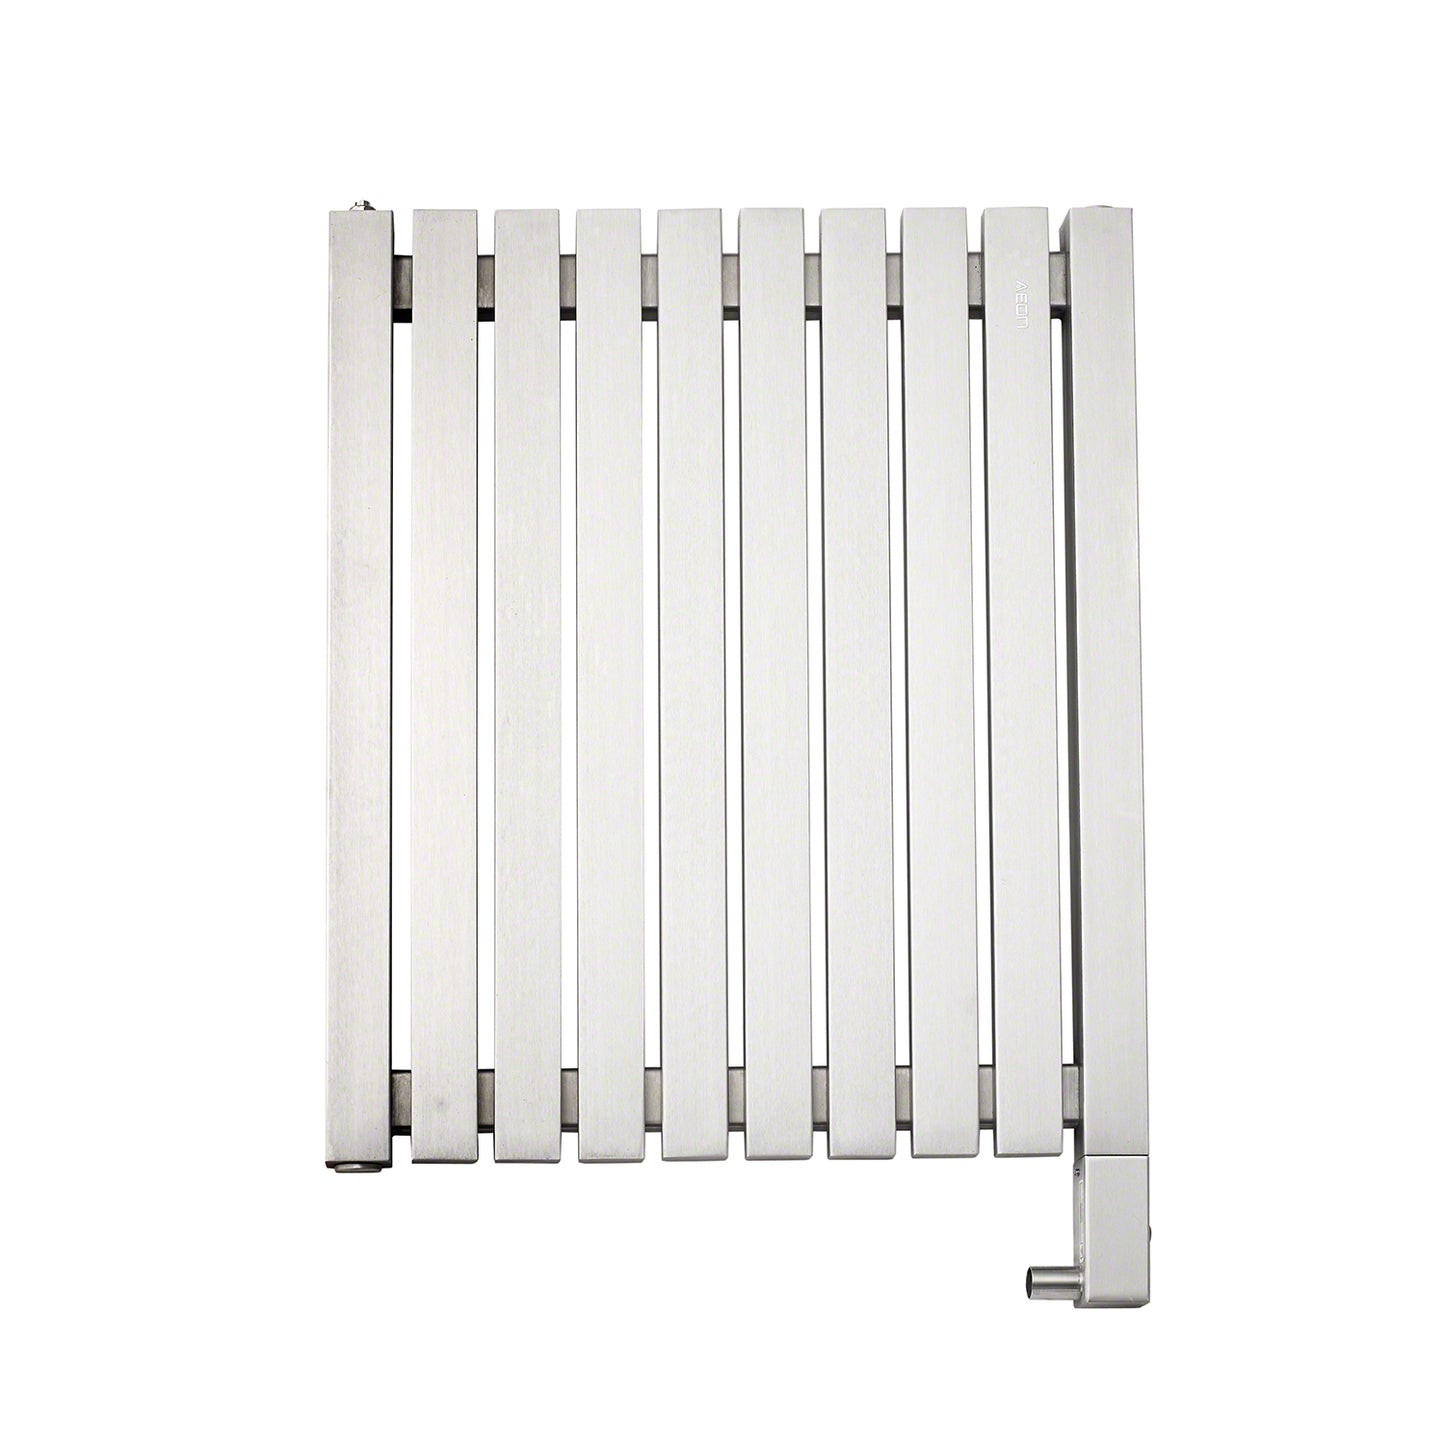 WX24 10-Bar Wall Mounted Electric Towel Warmer with Digital Timer in Stainless Steel Brushed